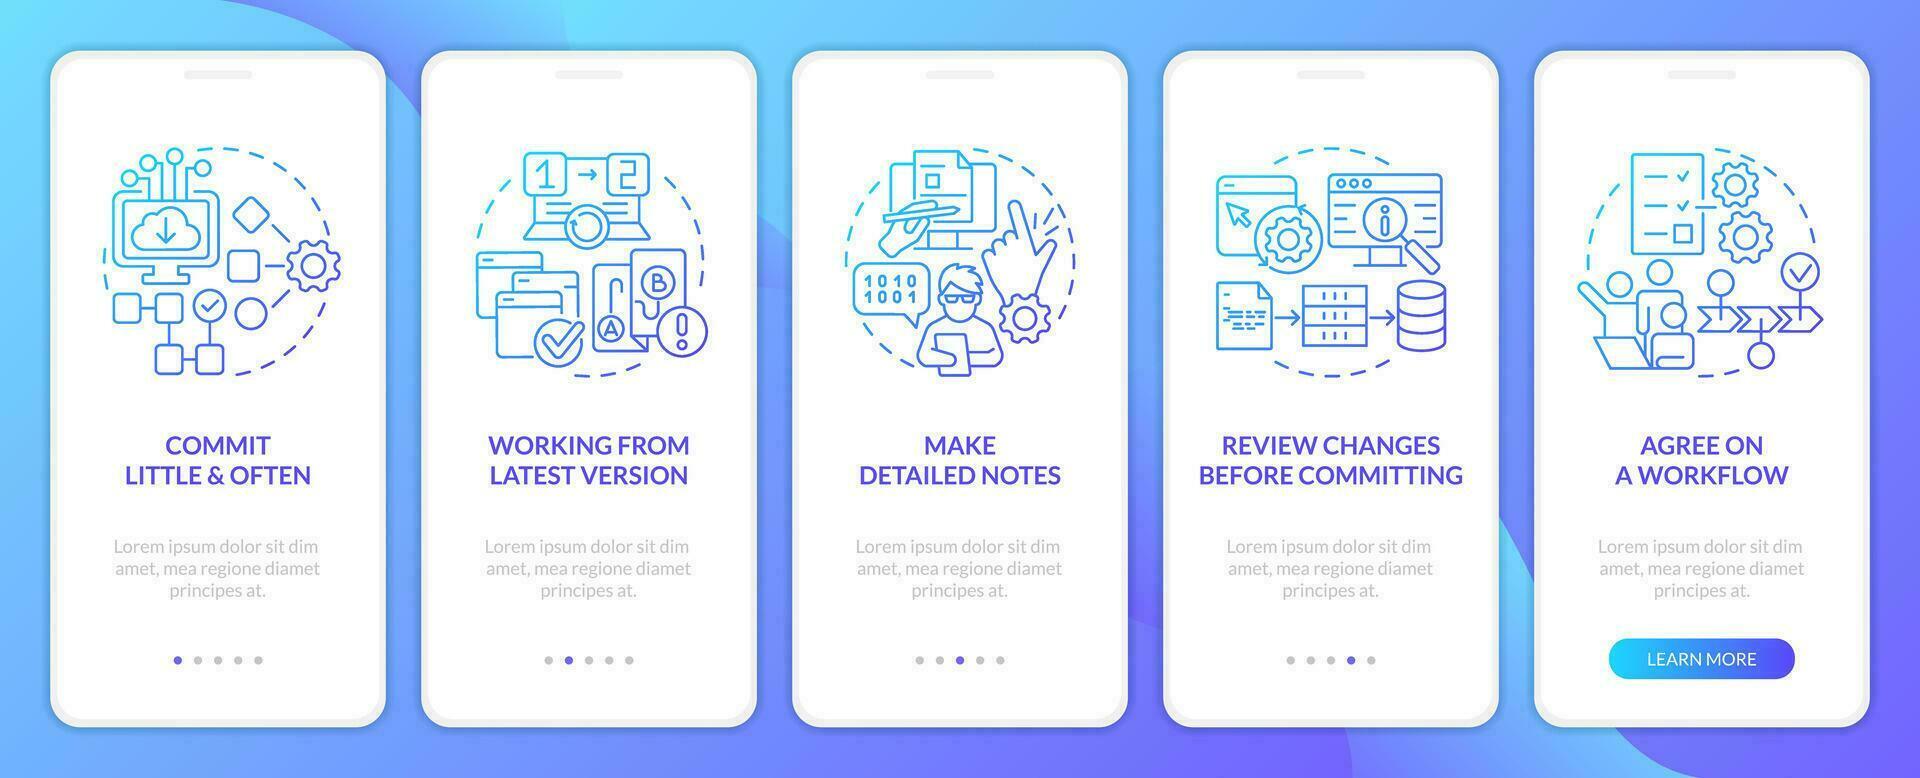 Source code management practices blue gradient onboarding mobile app screen. Walkthrough 5 steps graphic instructions with linear concepts. UI, UX, GUI templated vector